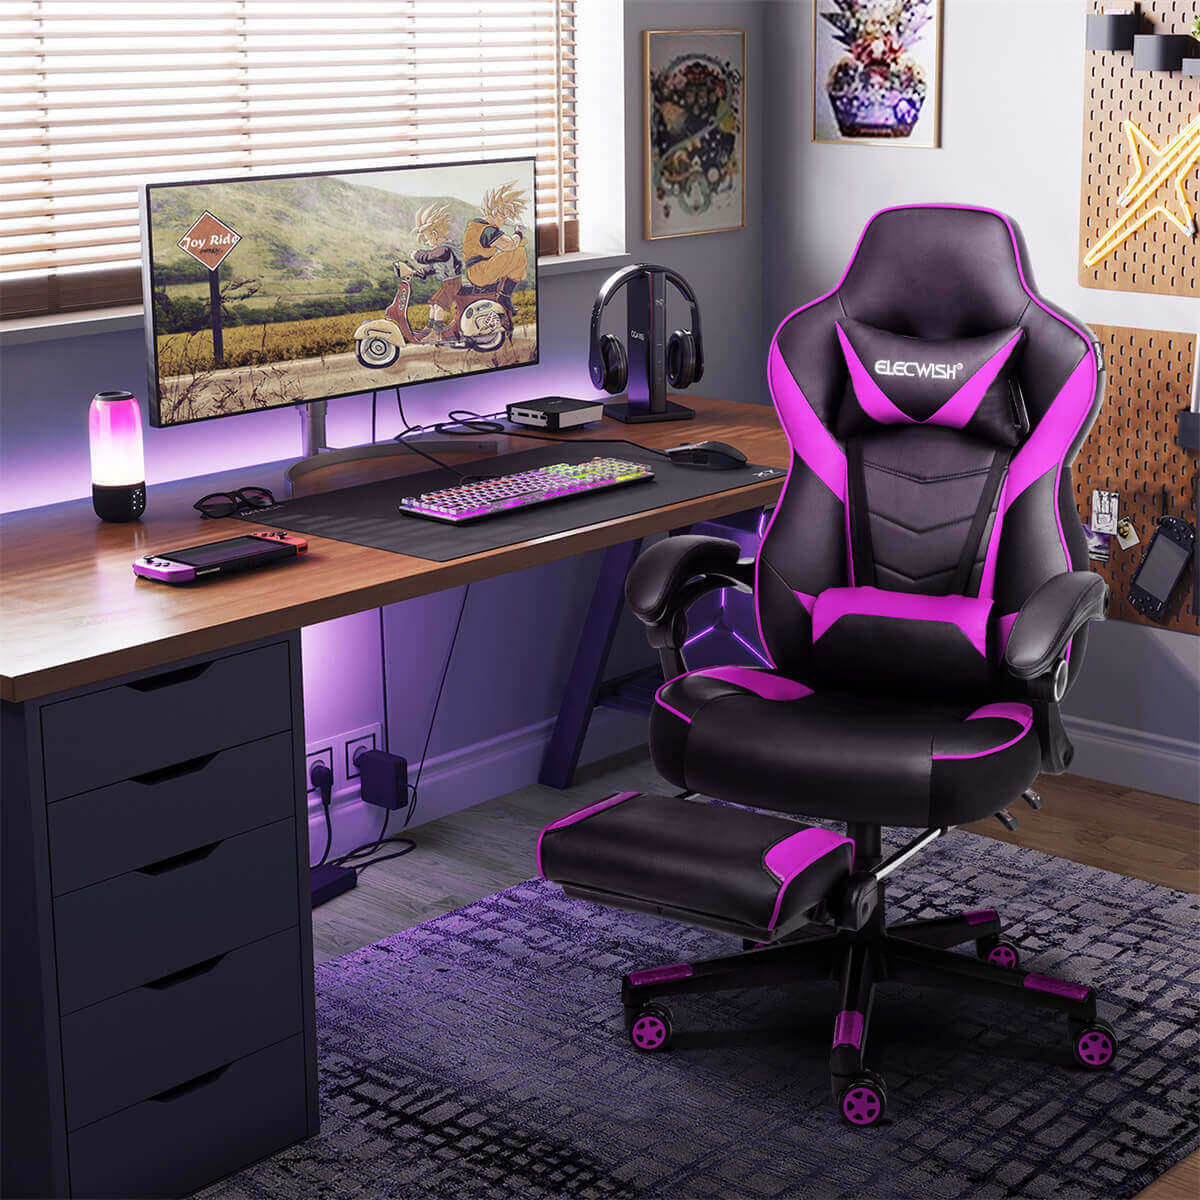 Elecwish Video Game Chairs Purple Gaming Chair With Footrest OC087 display situation